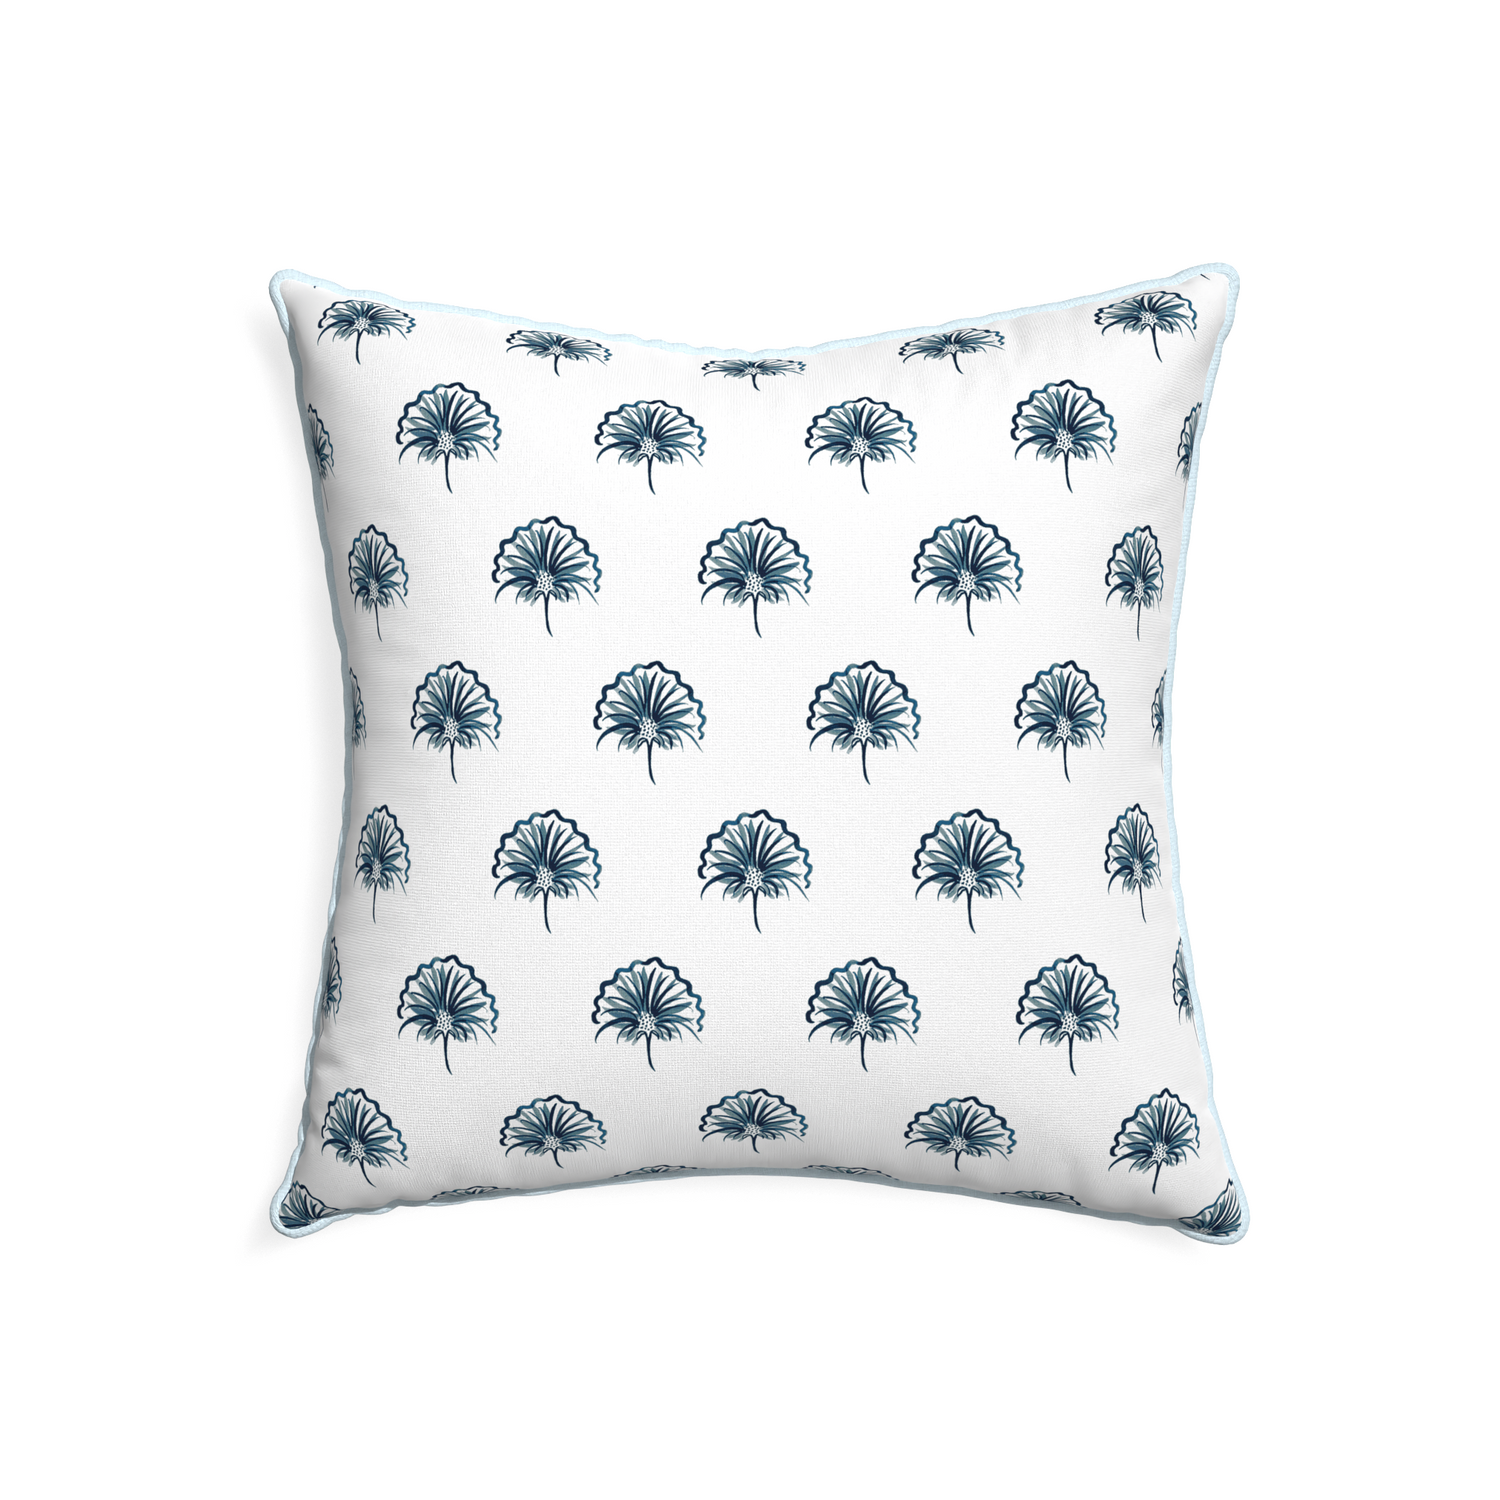 22-square penelope midnight custom floral navypillow with powder piping on white background